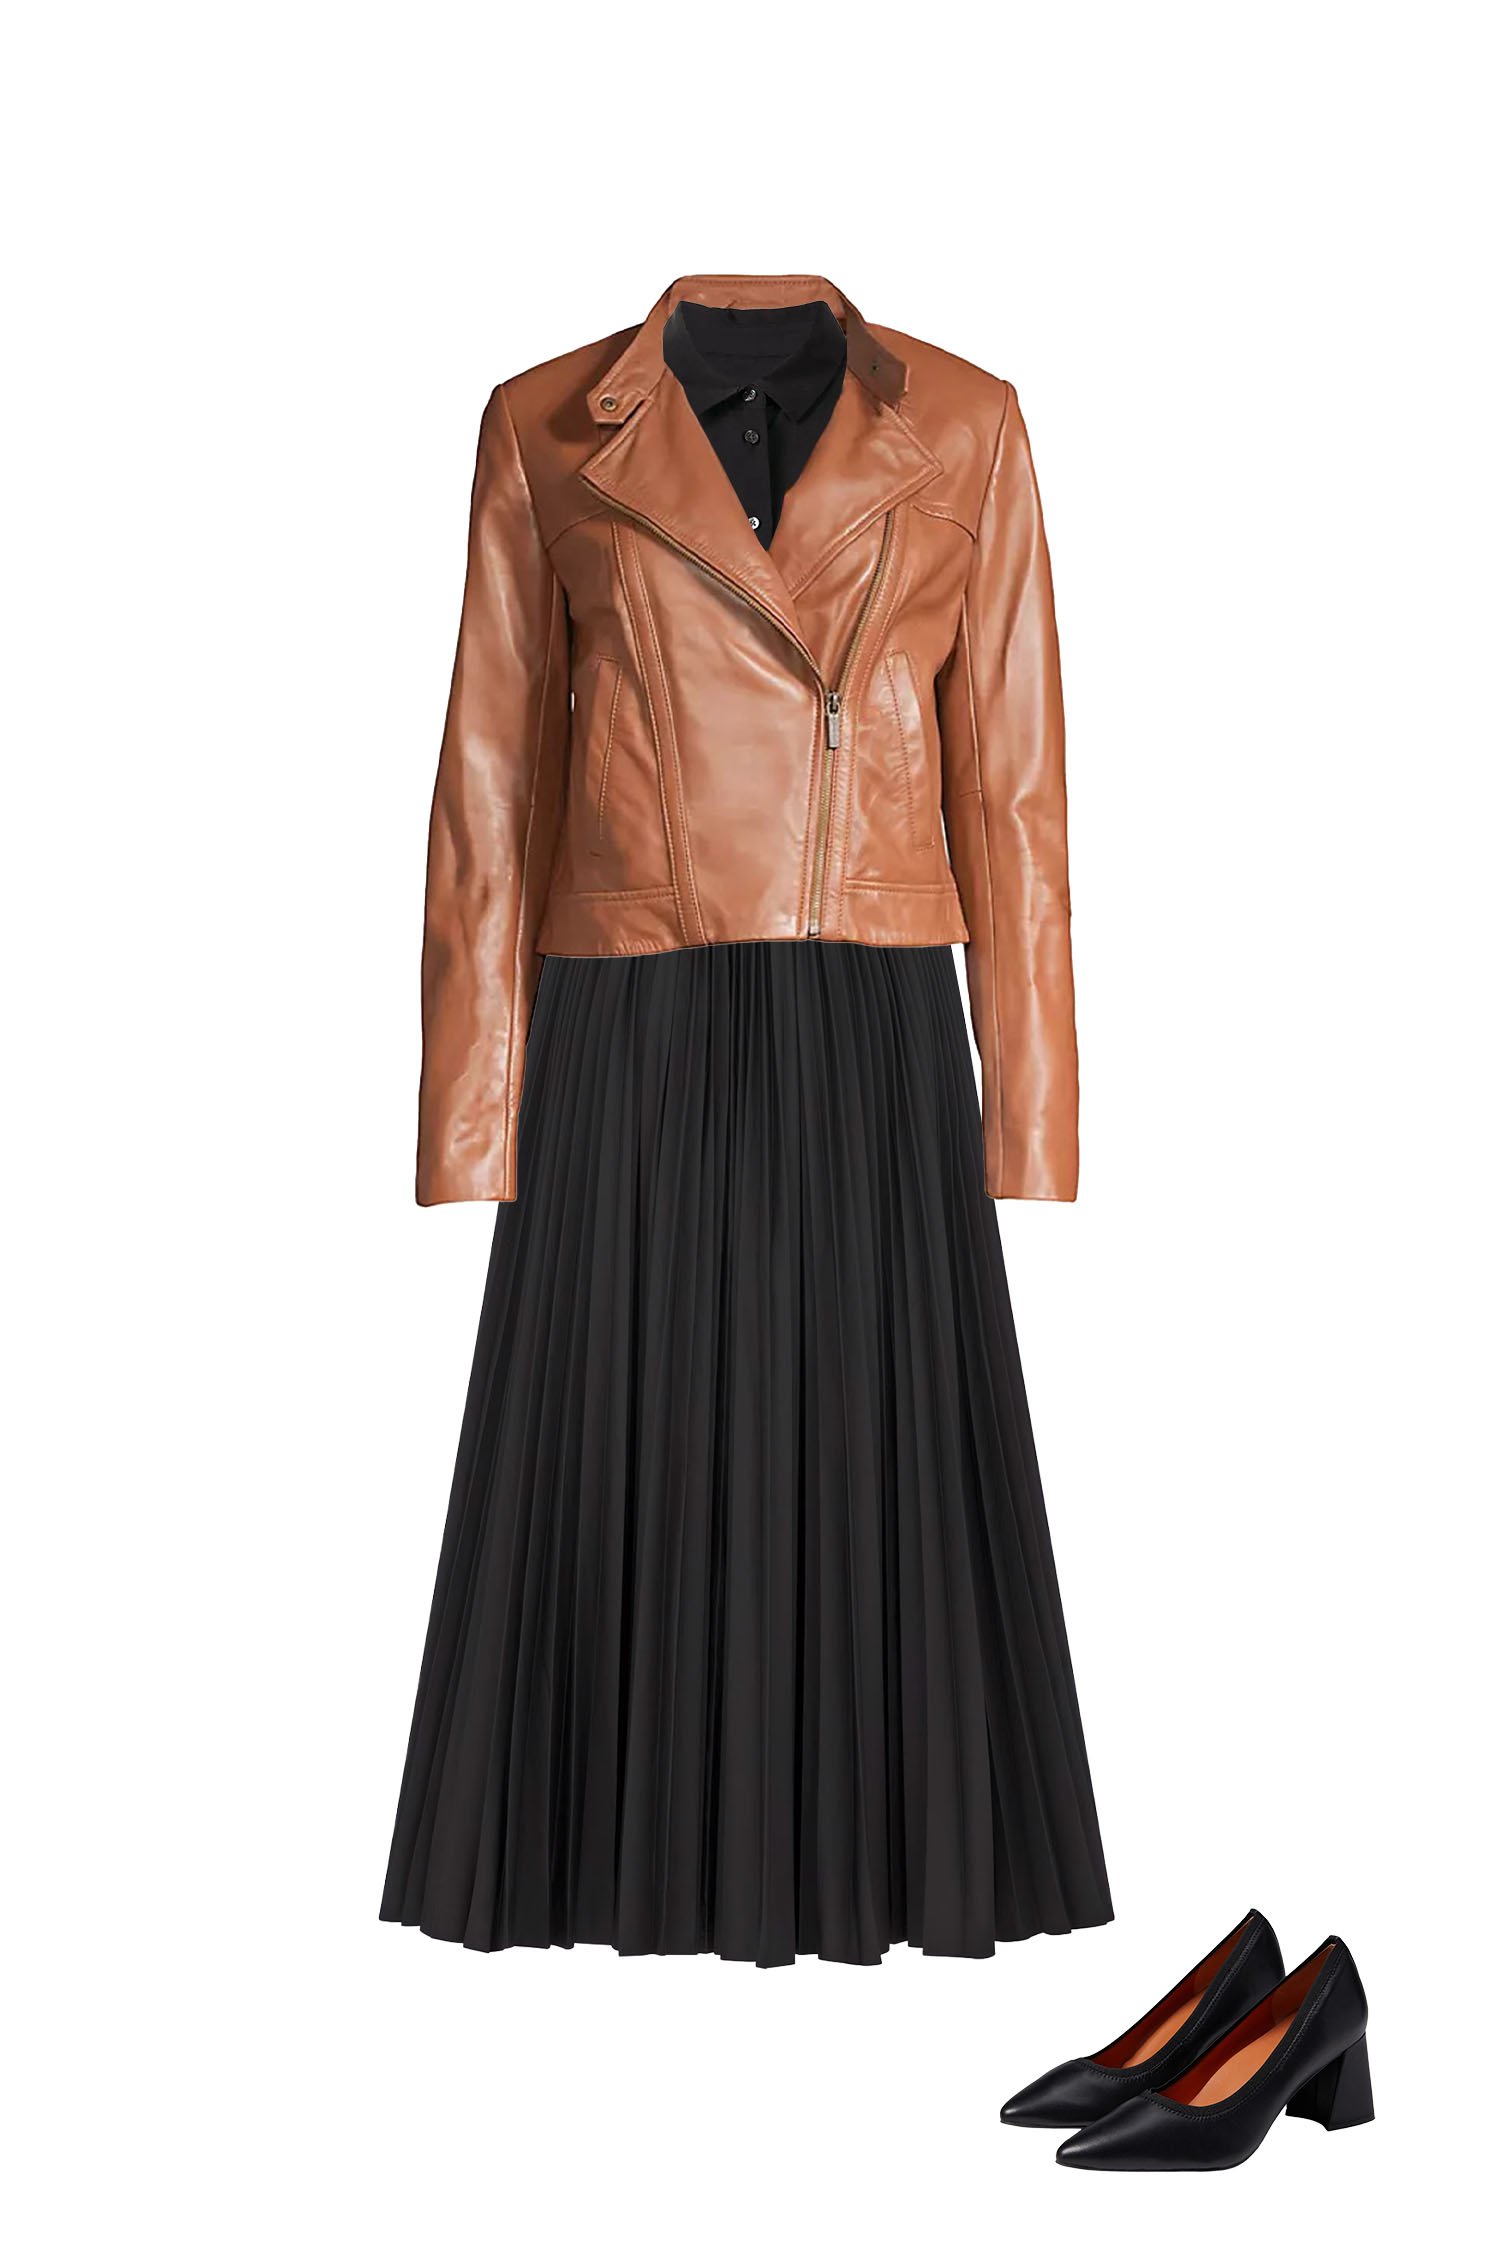 Black Pleated Skirt Outfit with Black Silk Shirt, Camel Brown Leather Jacket, and Black Block Heel Pumps